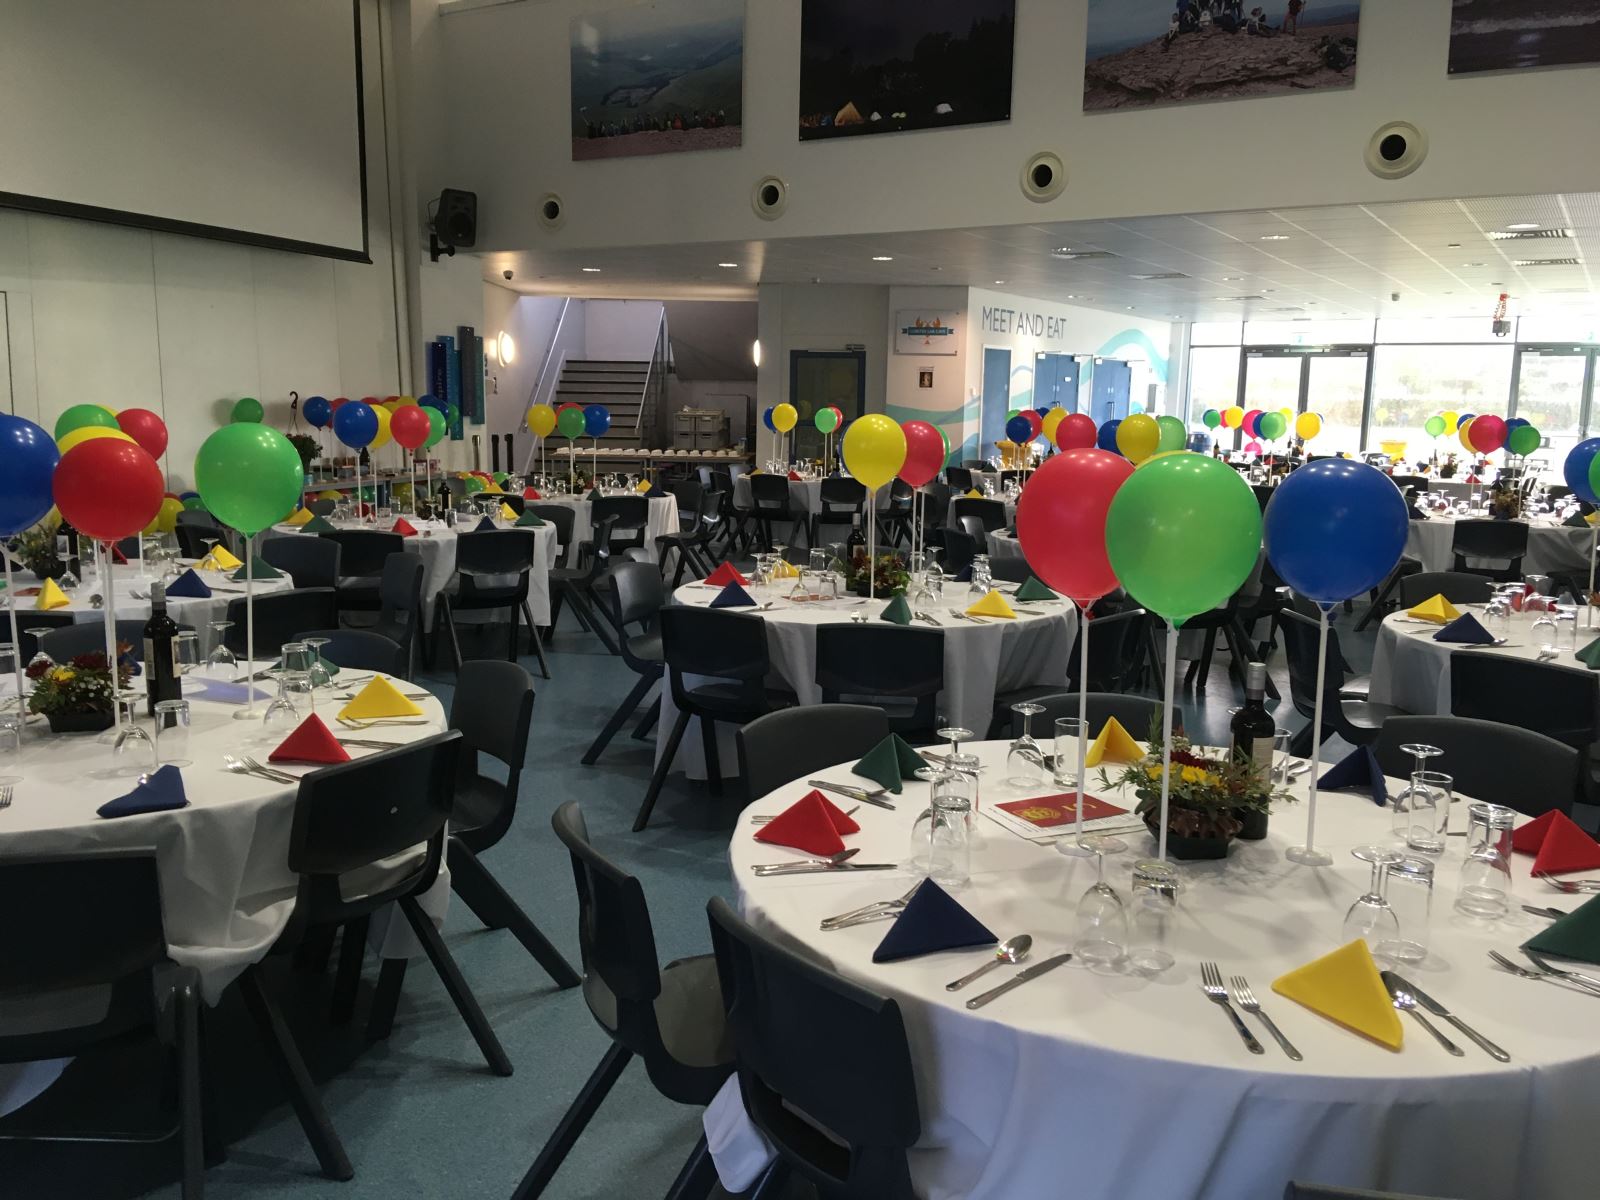 The Swanage School hall decorated for the Swanage Grammar School final reunion